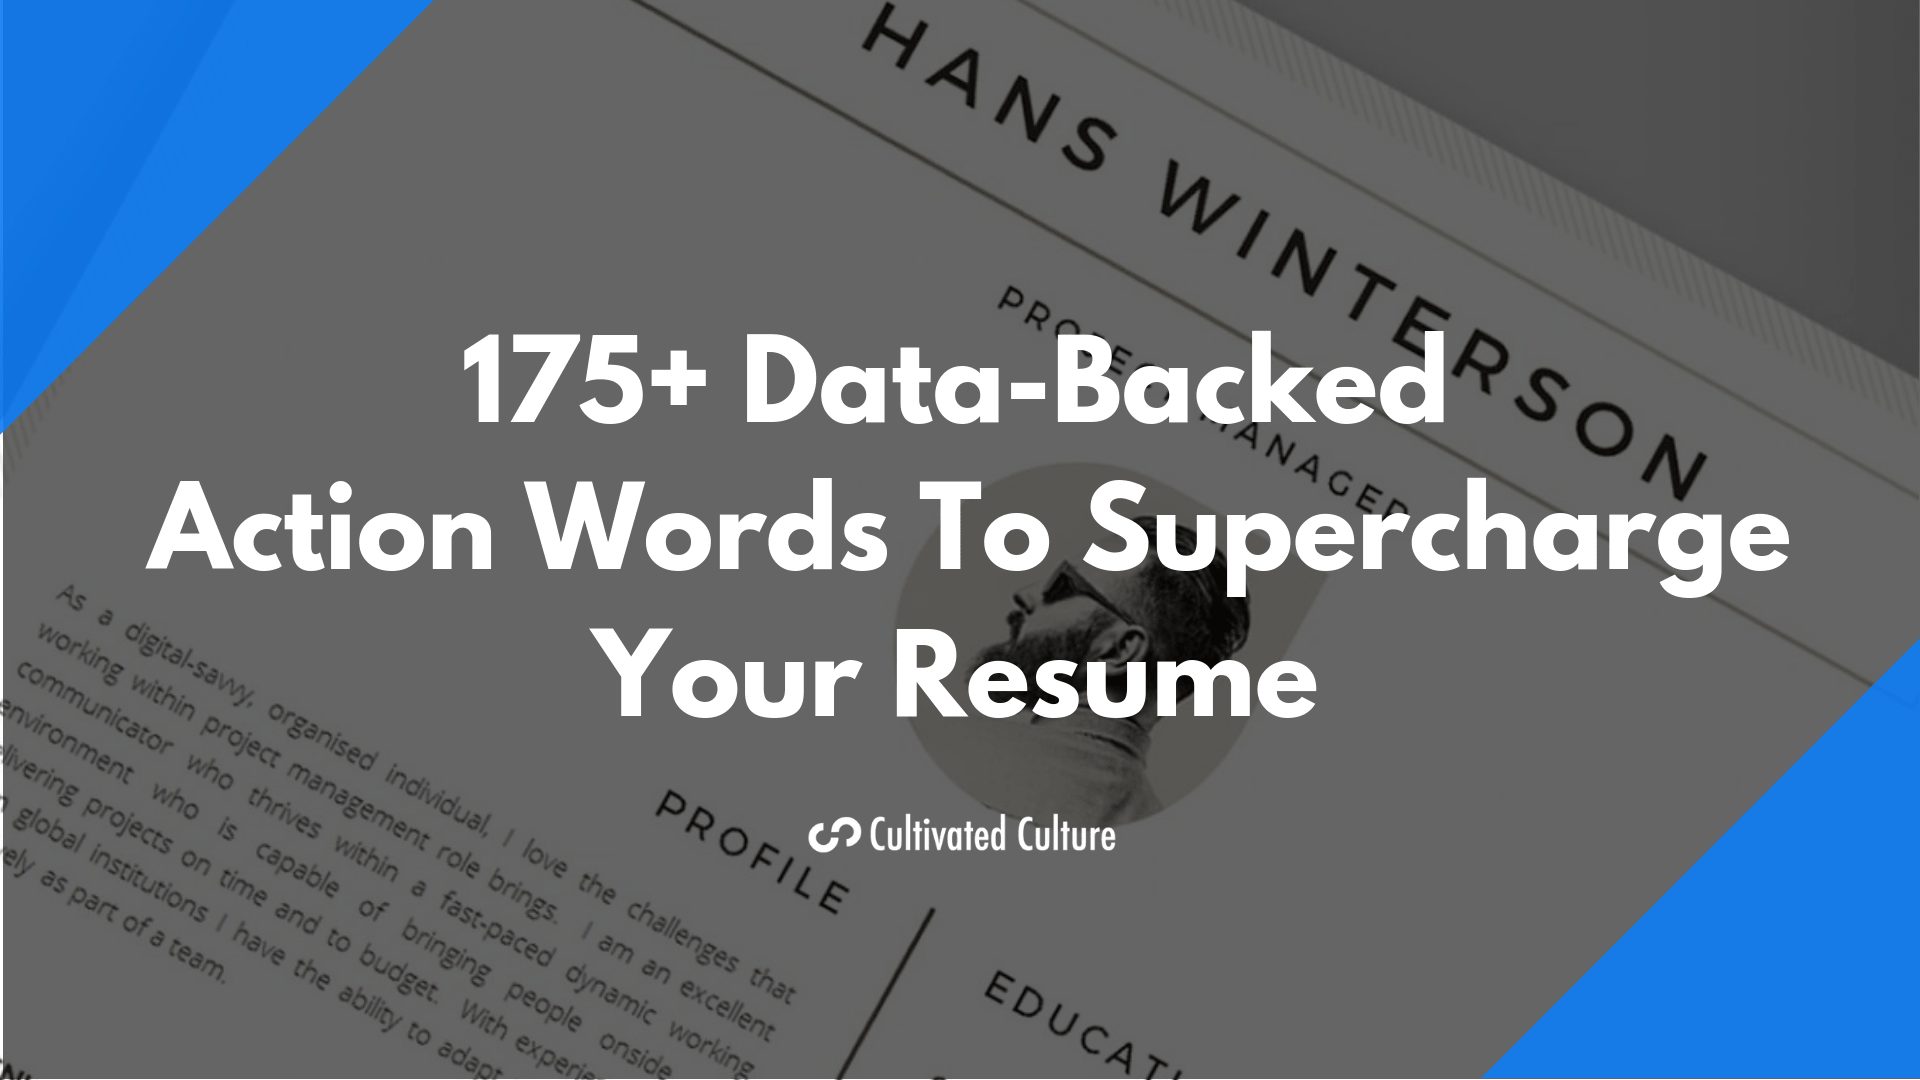 14 Days To A Better resume